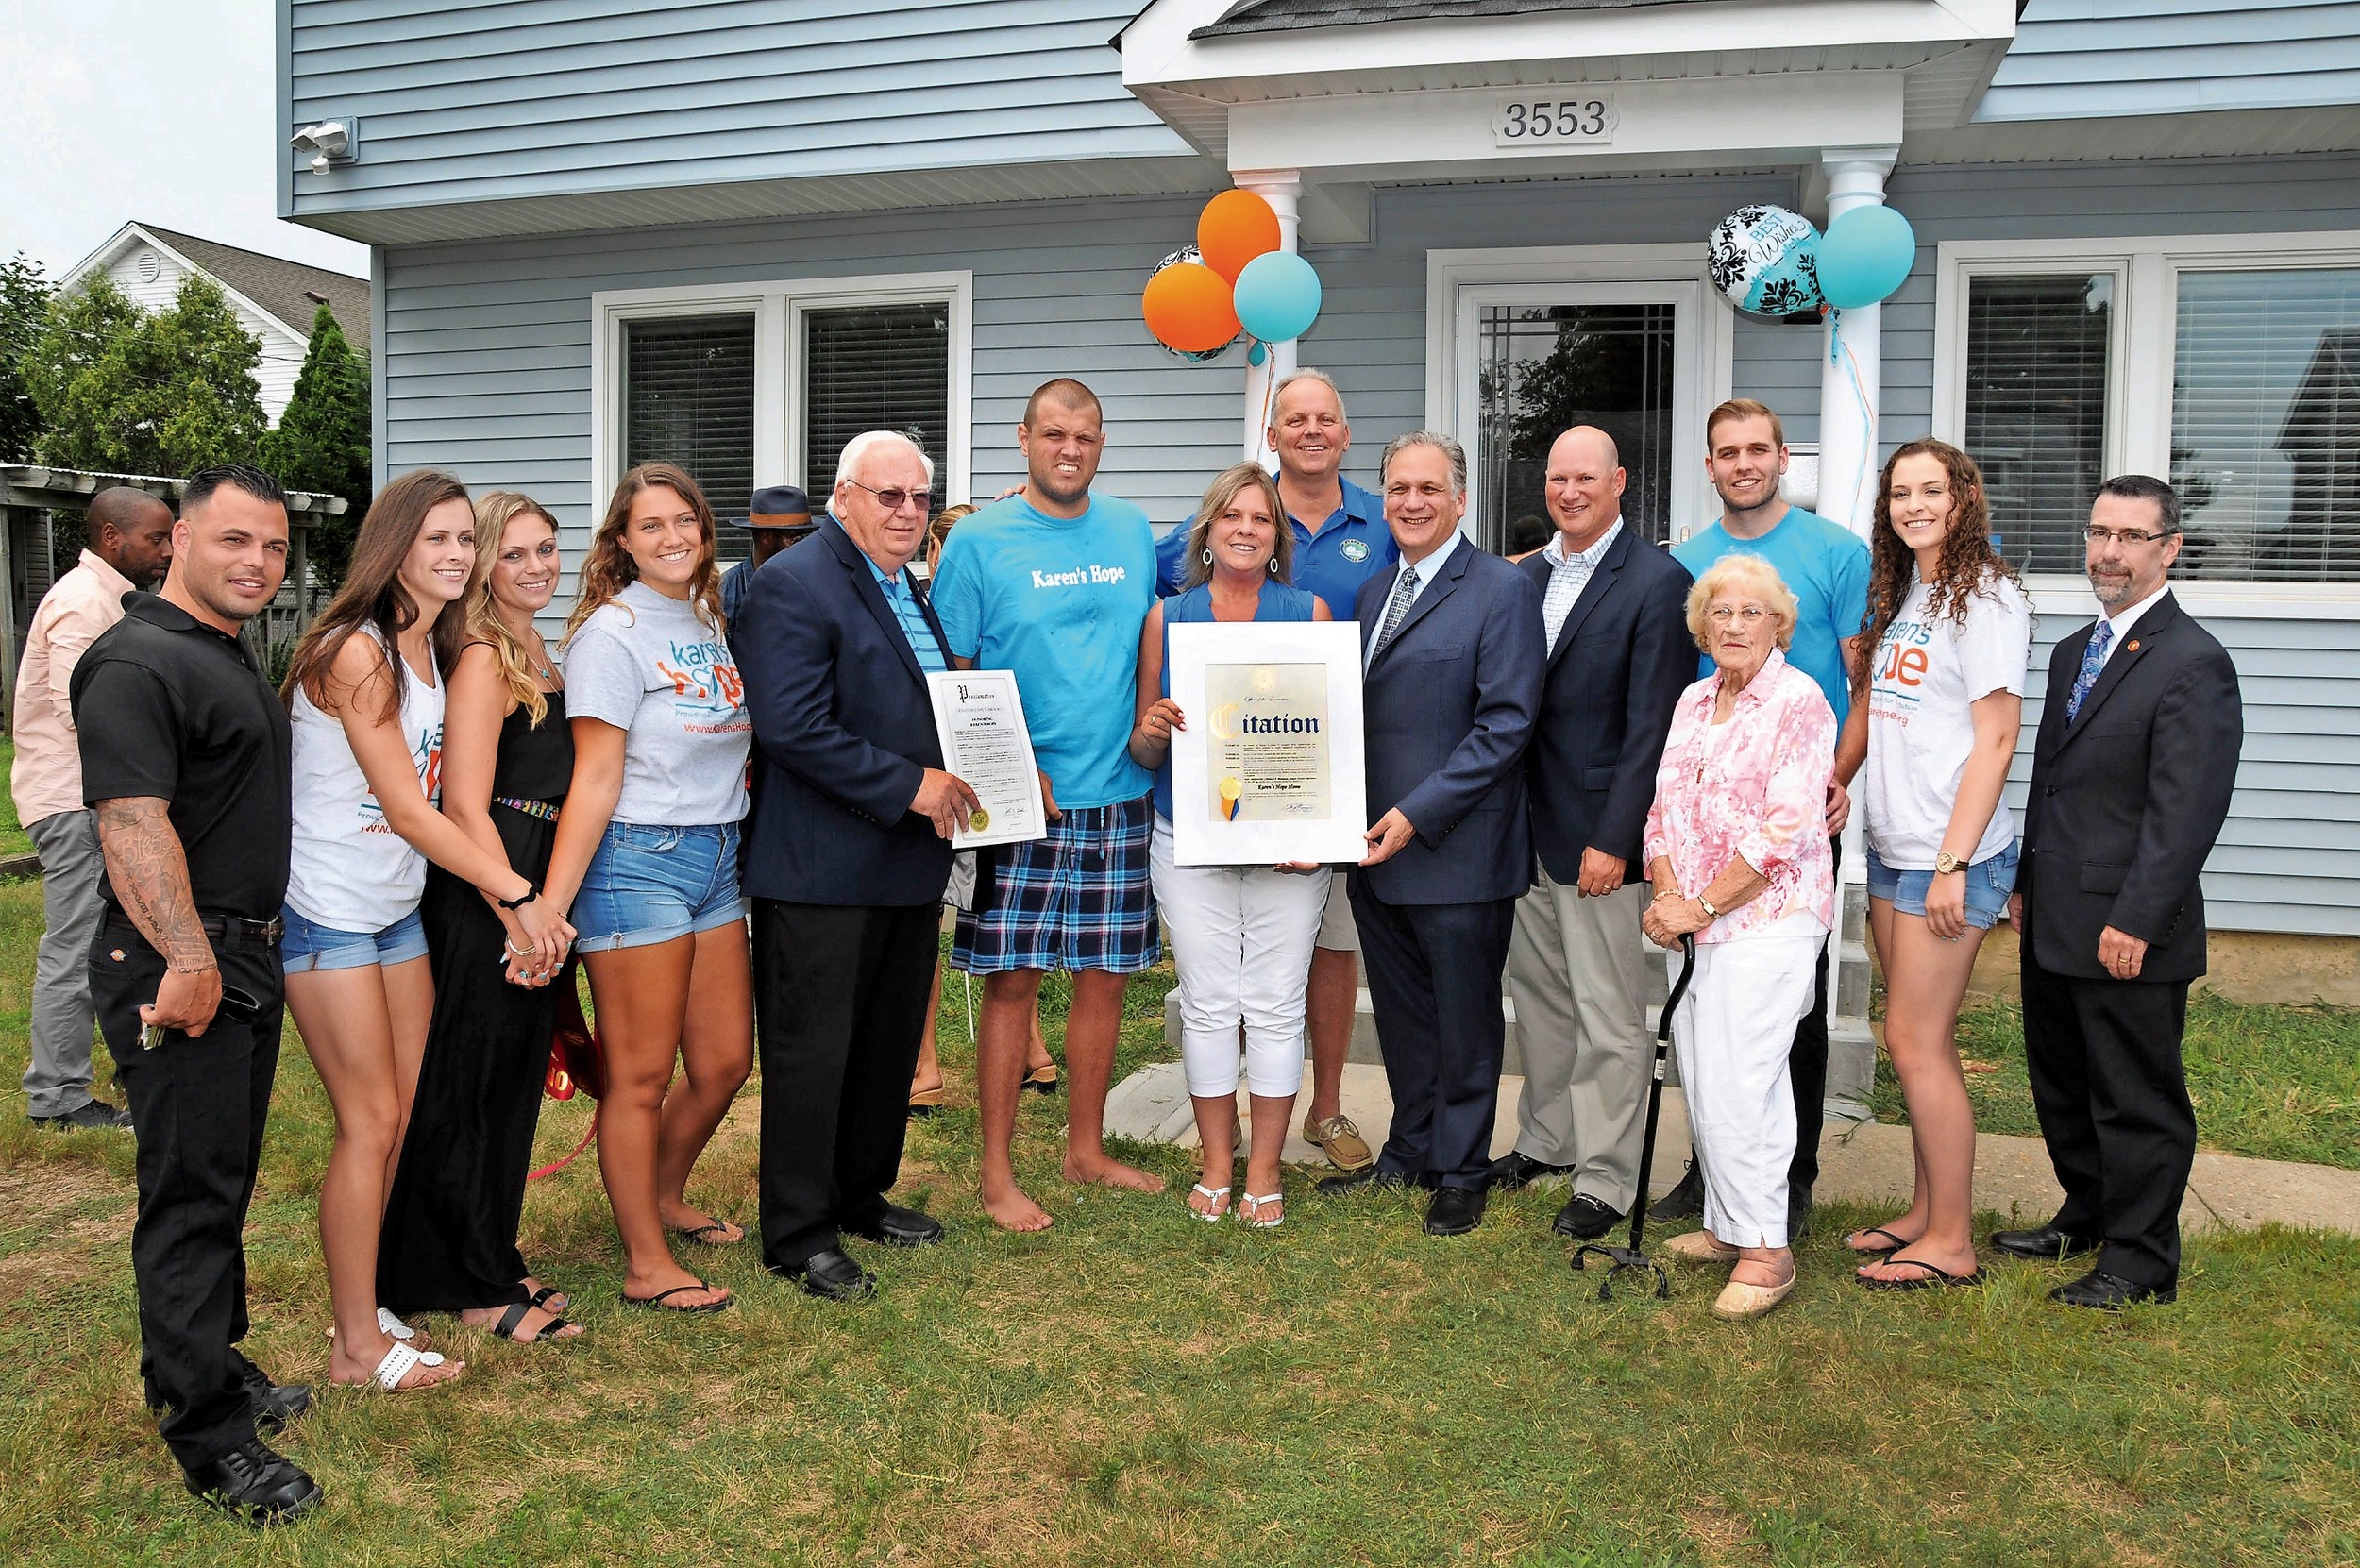 Karen’s Hope founders, volunteers, State Sen. John Brooks and County Executive Ed Mangano celebrated the renovation of a house for two disabled adults on July 28.